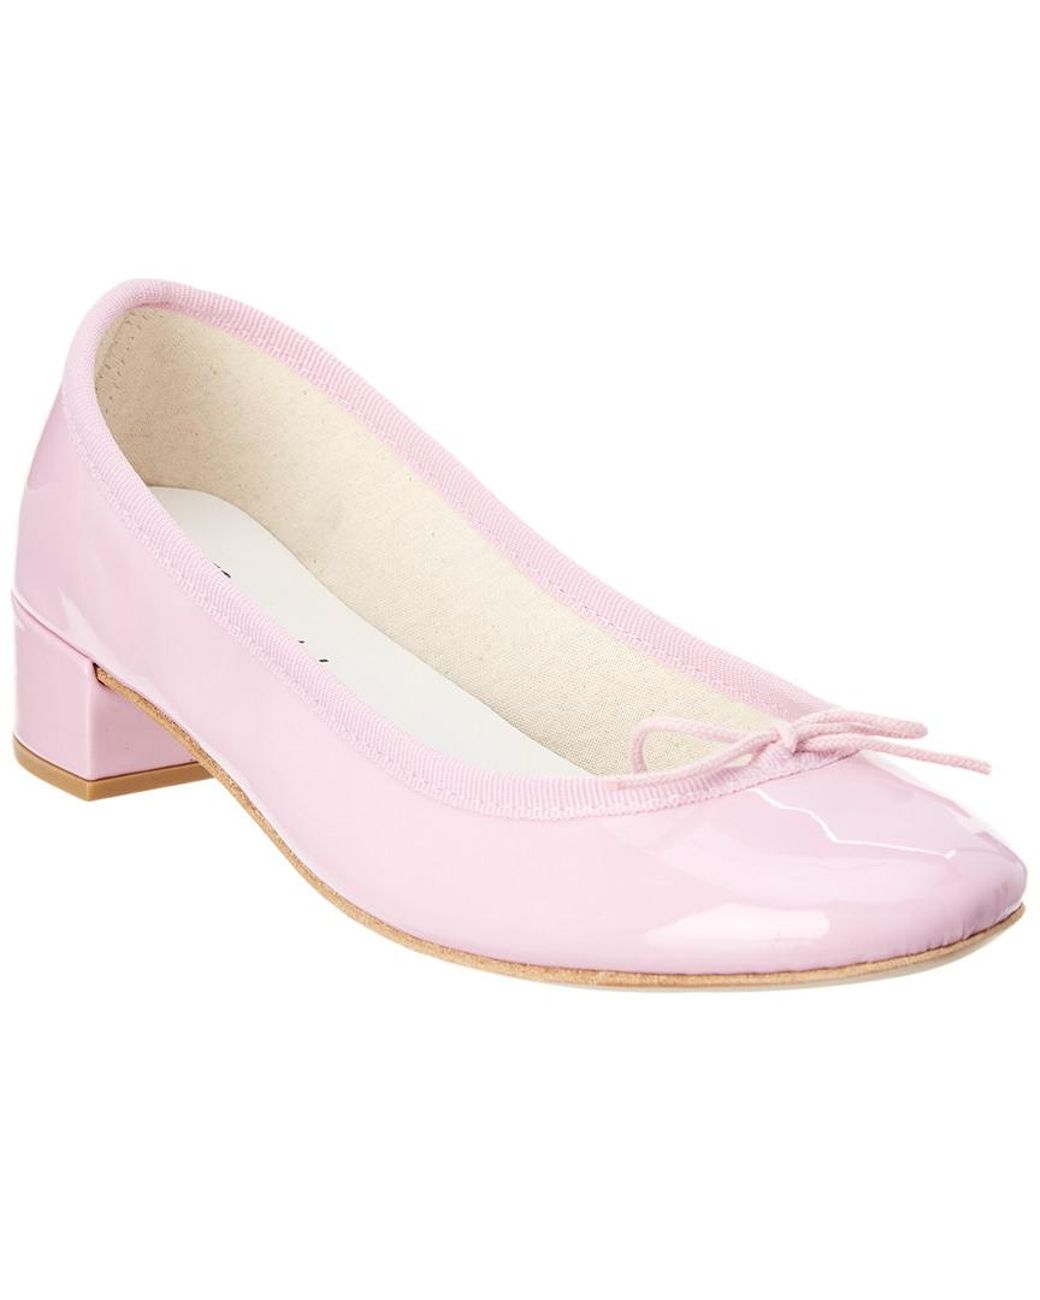 Repetto Camille Patent Ballerina Pump in Pink | Lyst